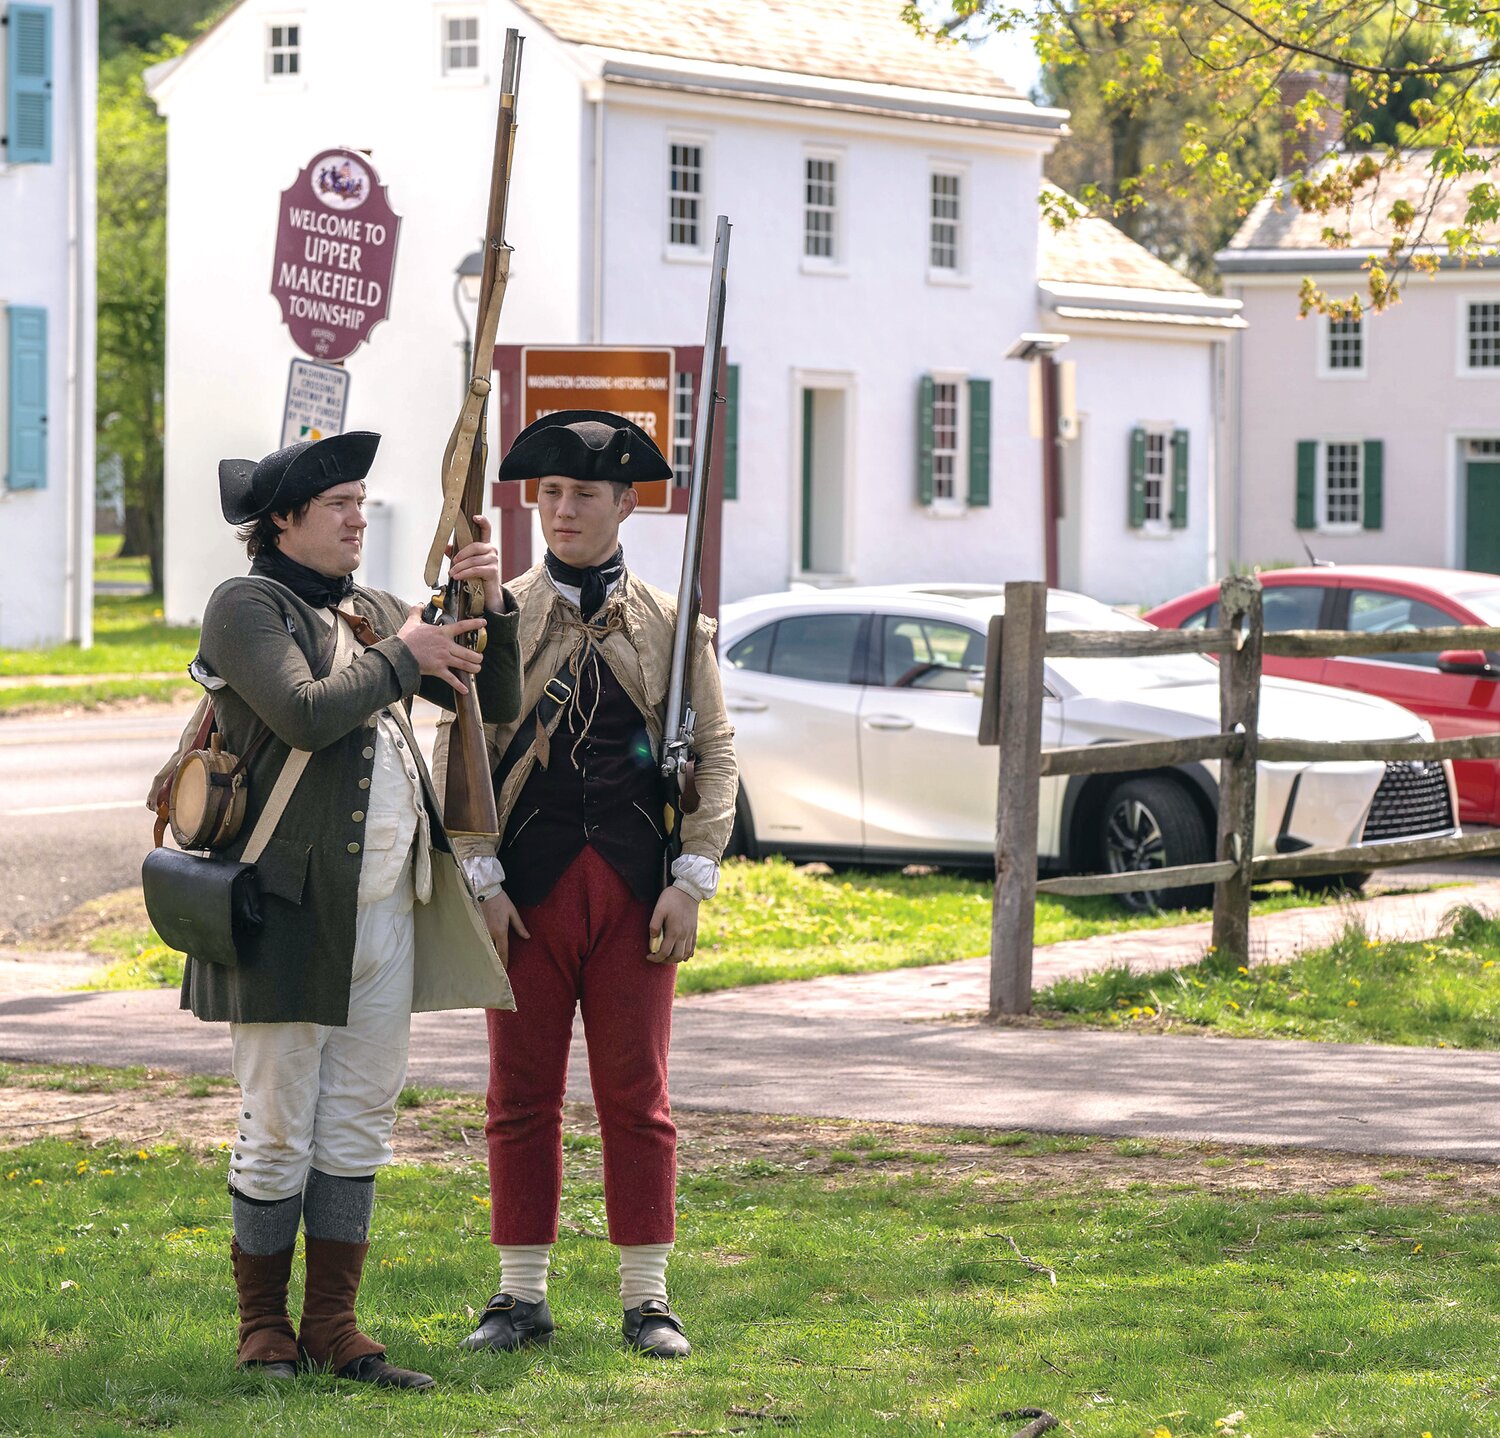 Reenactors practice with the muskets at Washington Crossing Historic Park in Upper Makefield.